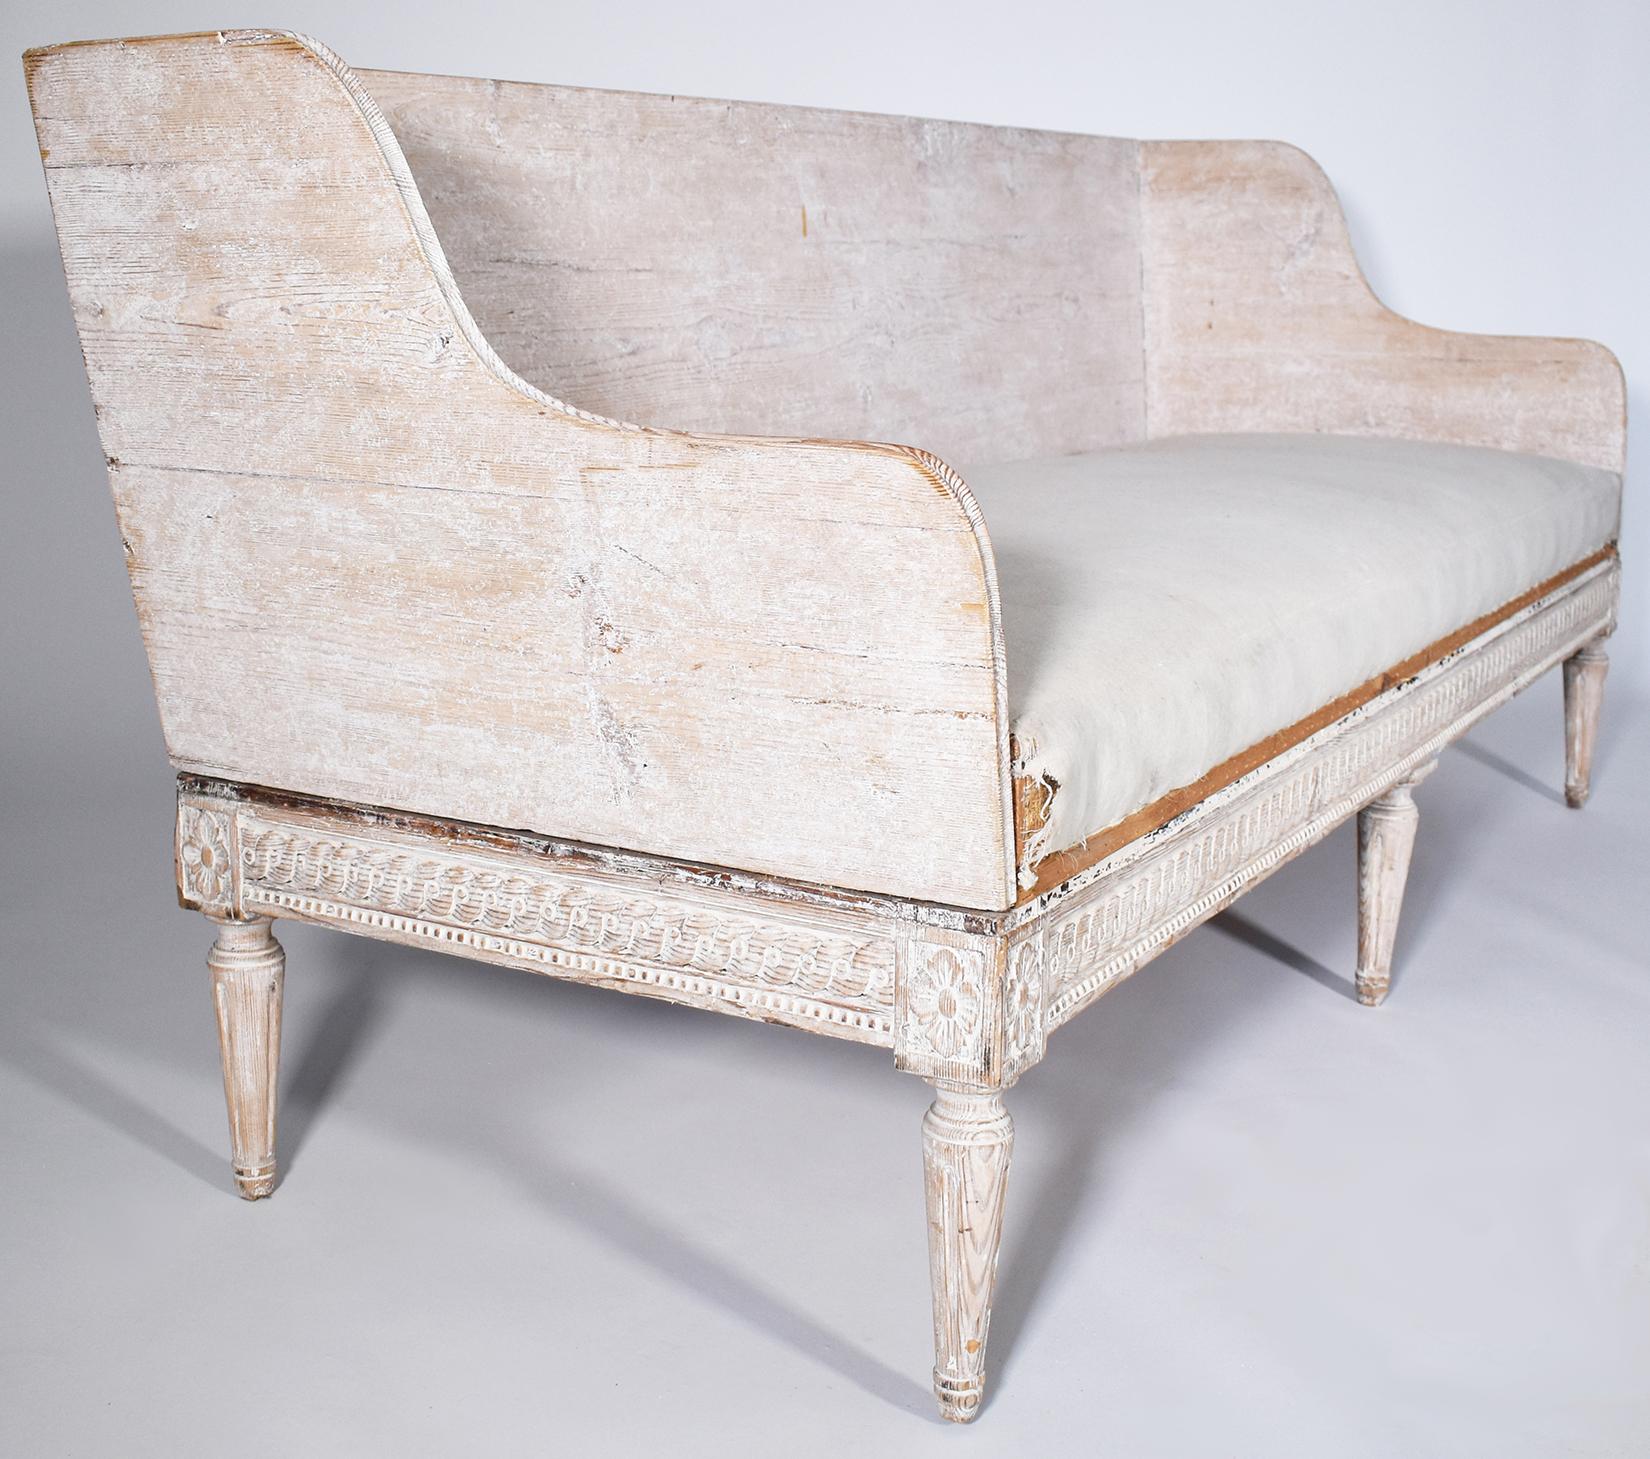 Stunning hand-carving on this 18th-century Trag sofa. It features elegant, hand-carved lines and a pale patina. It is a striking piece that has been reupholstered in an 18-ounce Belgian linen seat. An excellent find for an appreciative owner.